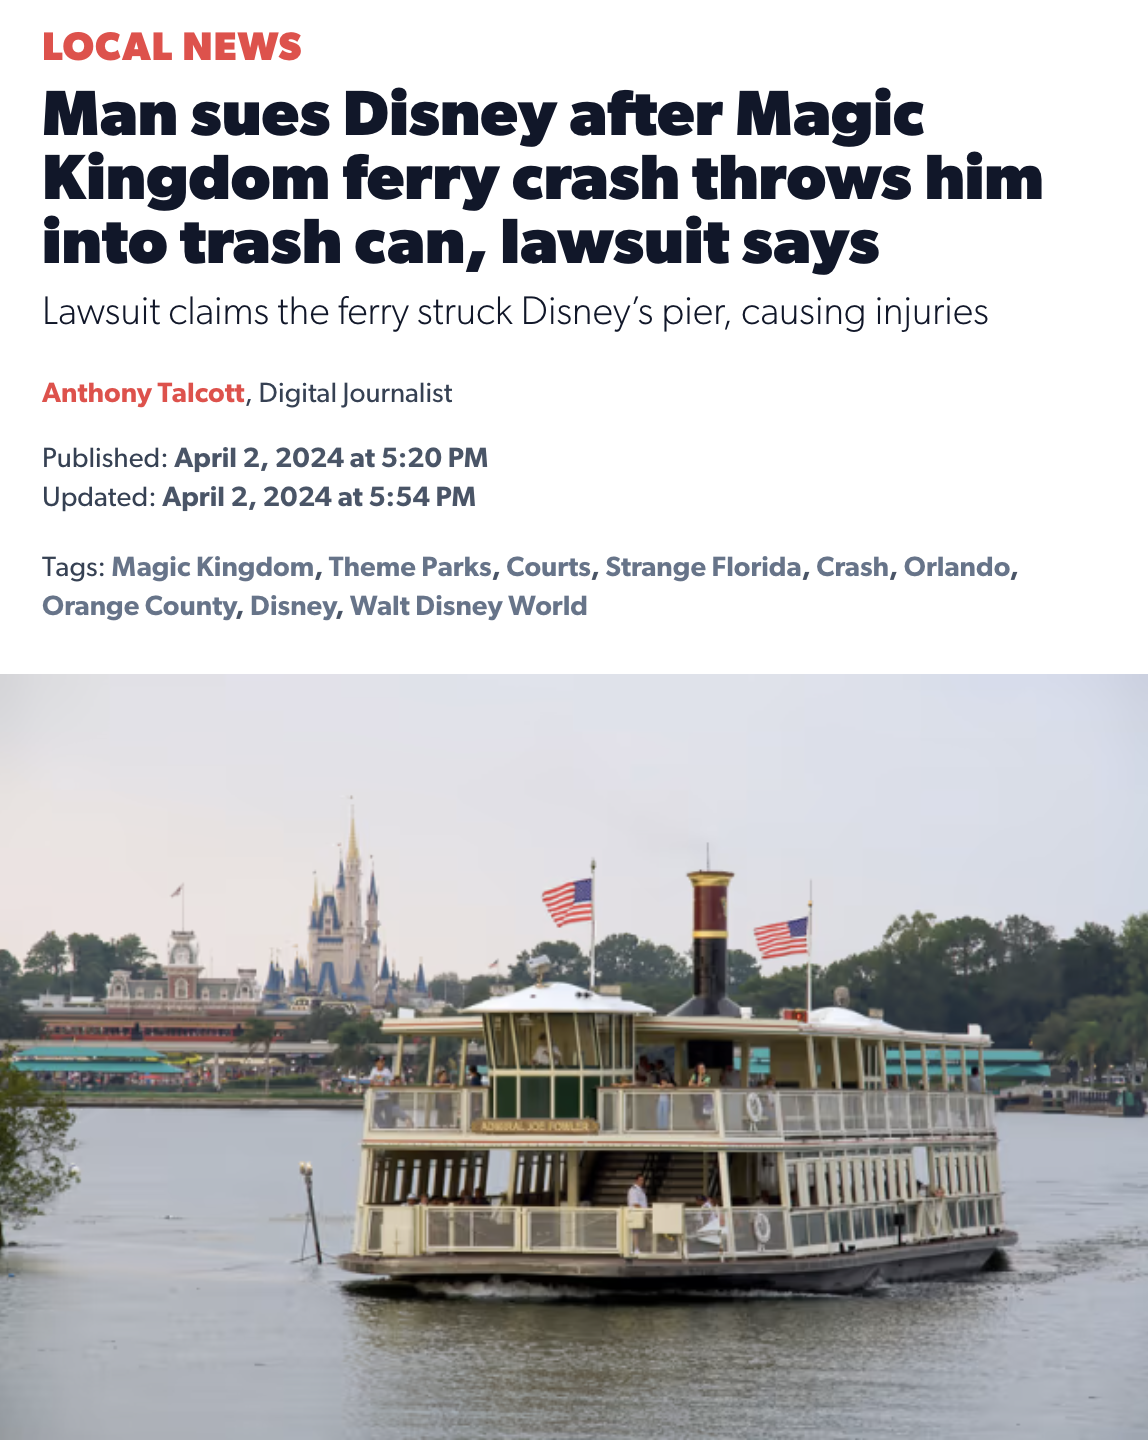 wonders of the world - Local News Man sues Disney after Magic Kingdom ferry crash throws him into trash can, lawsuit says Lawsuit claims the ferry struck Disney's pier, causing injuries Anthony Talcott, Digital Journalist Published at Updated at Tags Magi